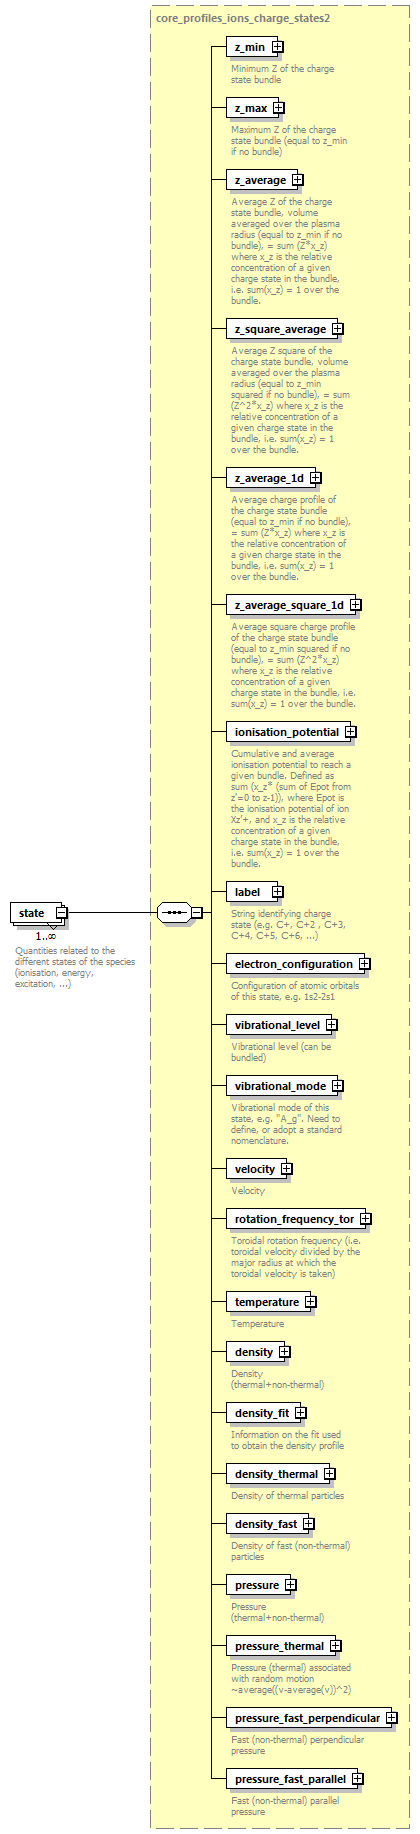 dd_data_dictionary.xml_p130.png